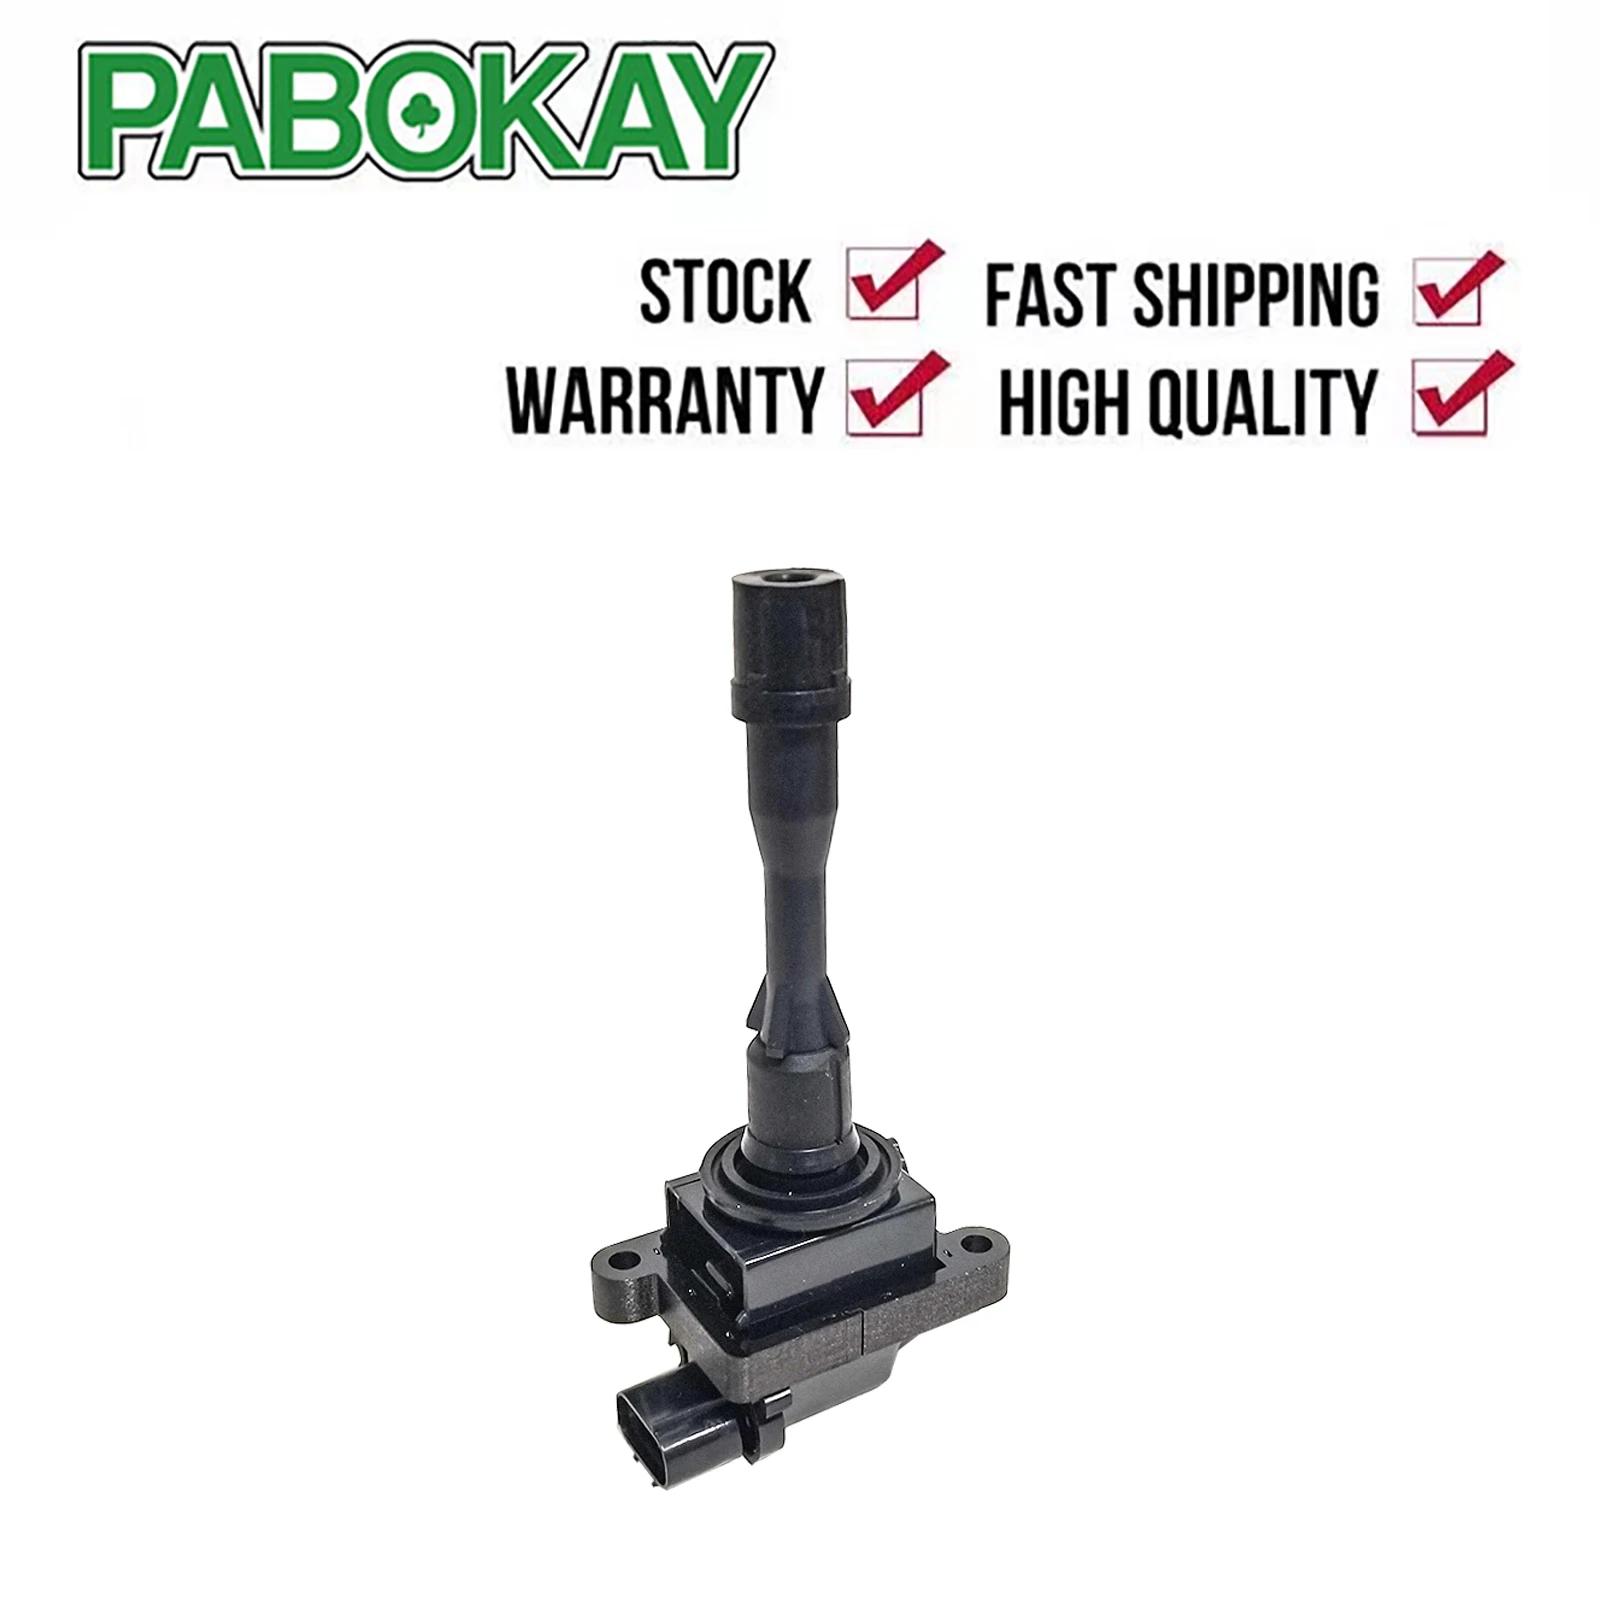 

FOR DAIHATSU TERIOS 1.3 4WD 1997 TO 2000 CT-21 - ULTRA Ignition Coil 1950087101 FI0080 19500-87101